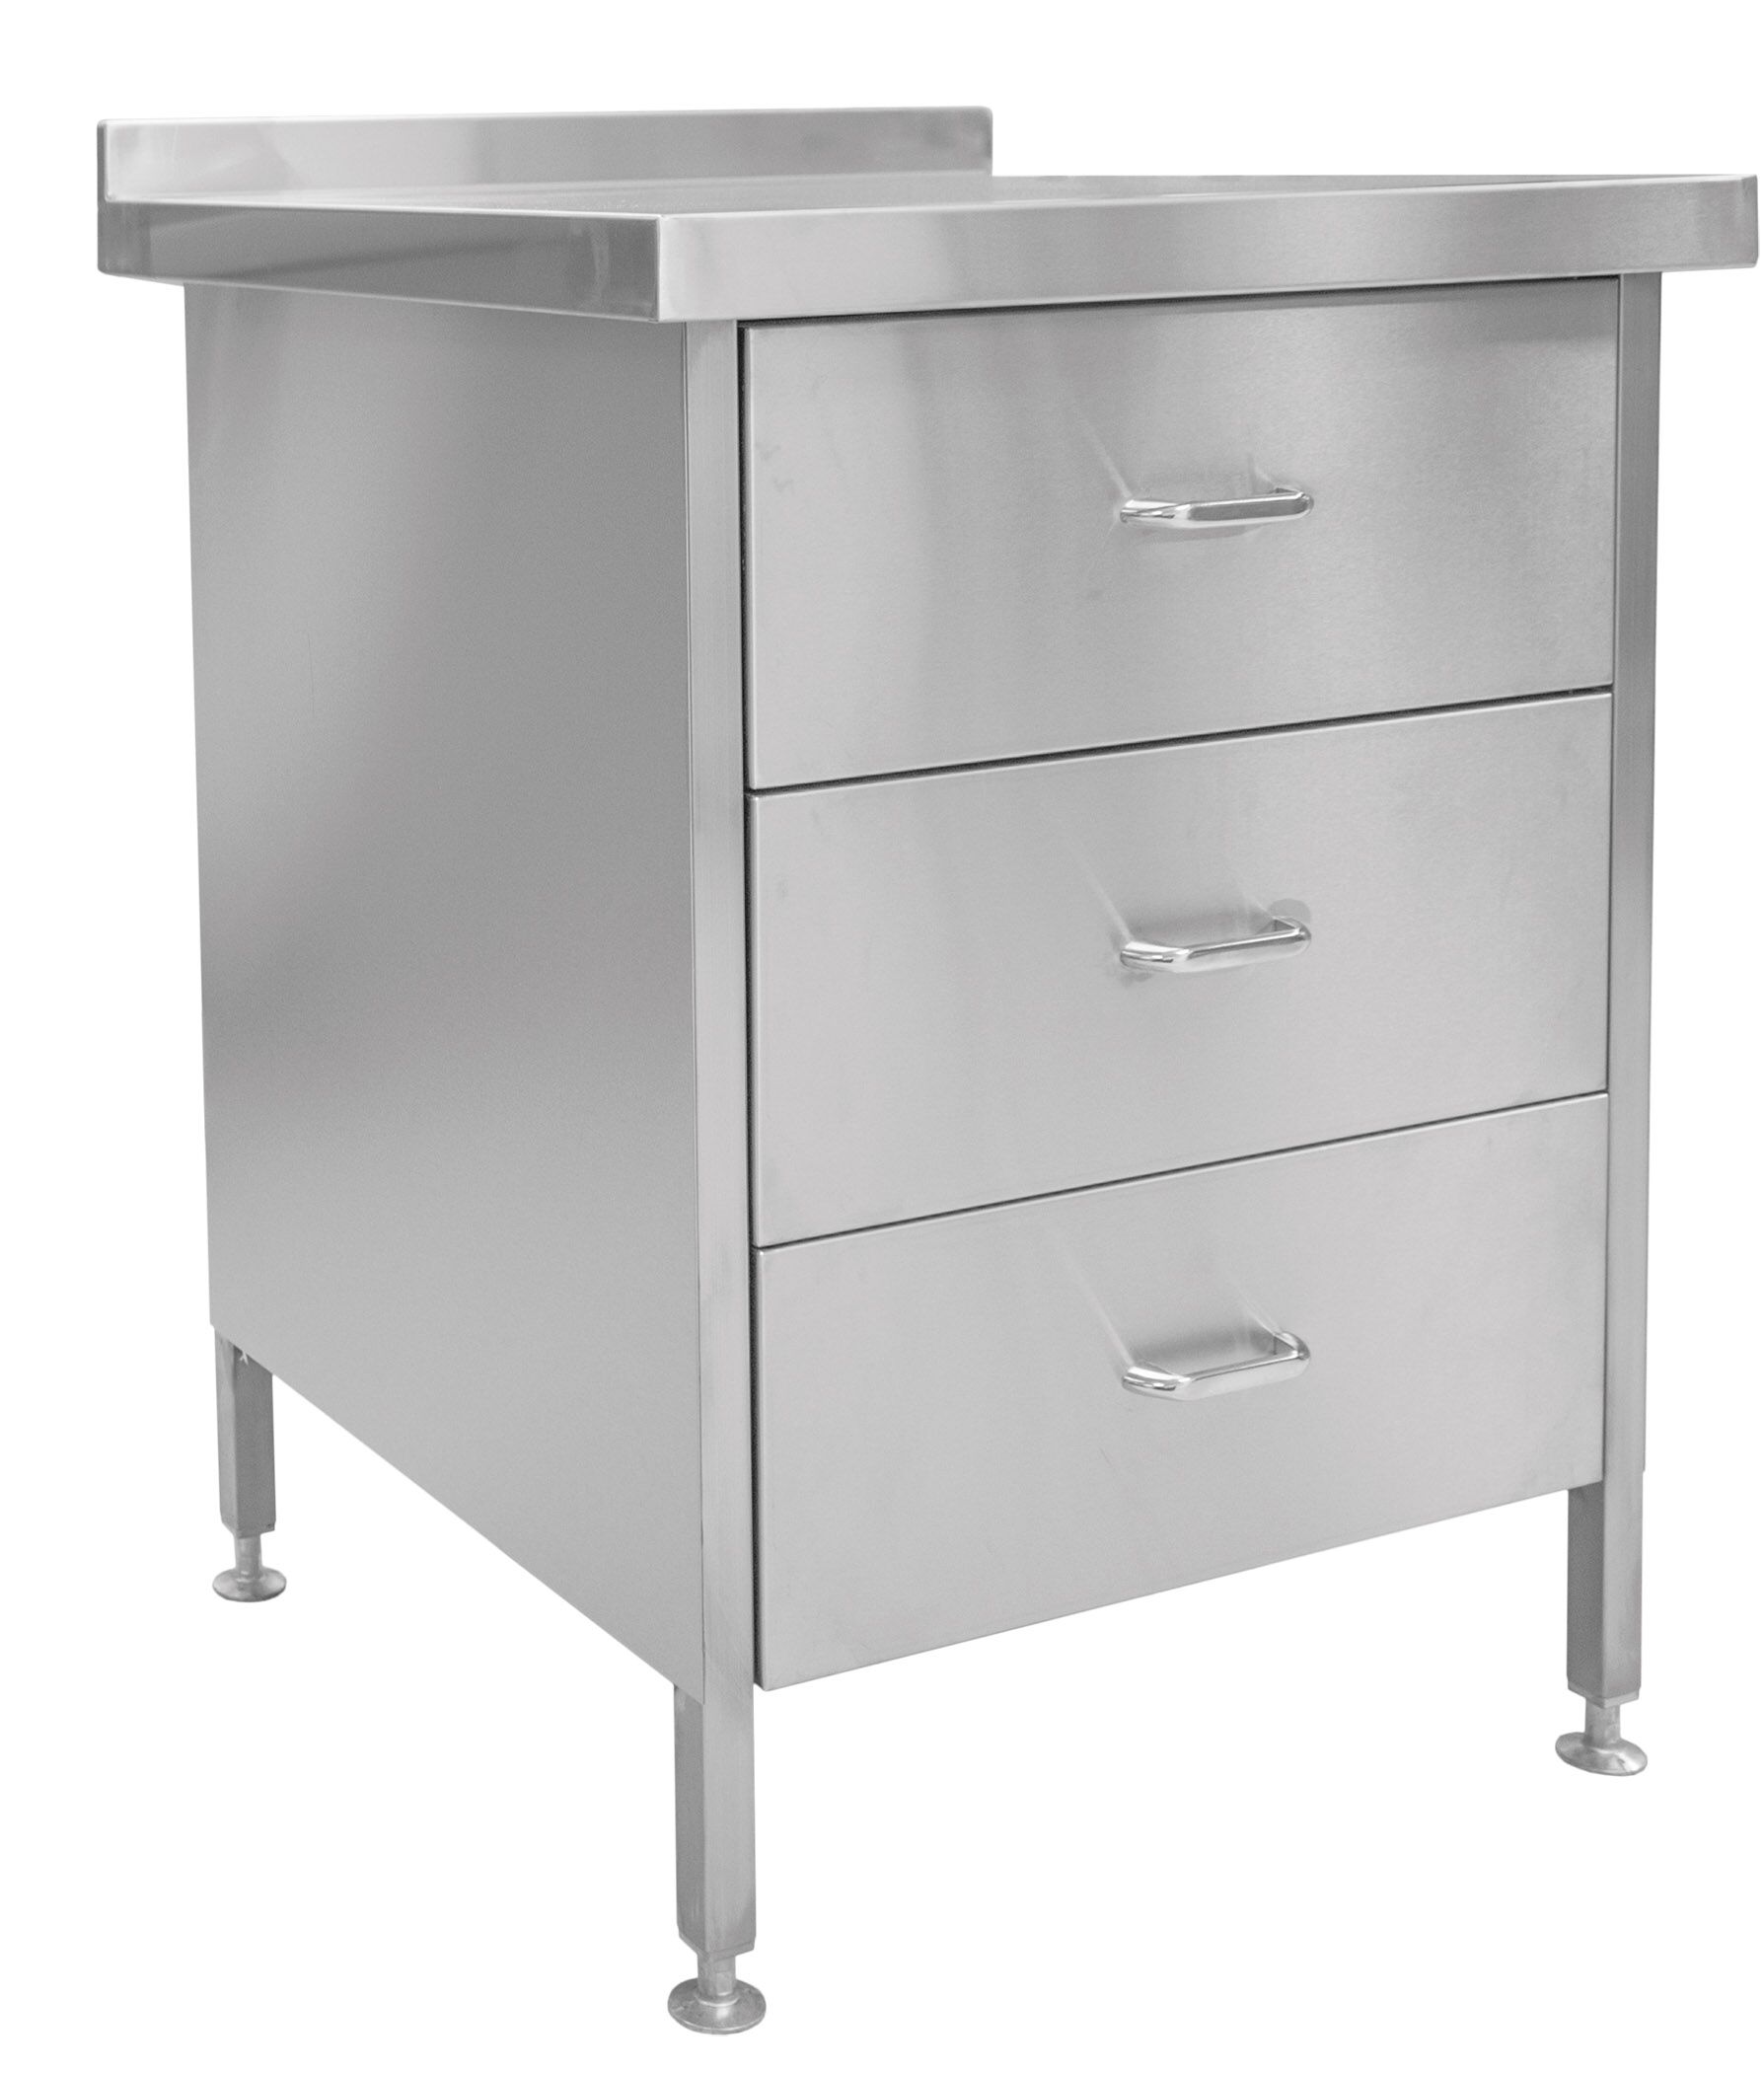 Parry DRAWER3 - Stainless Steel 3 Drawer Unit